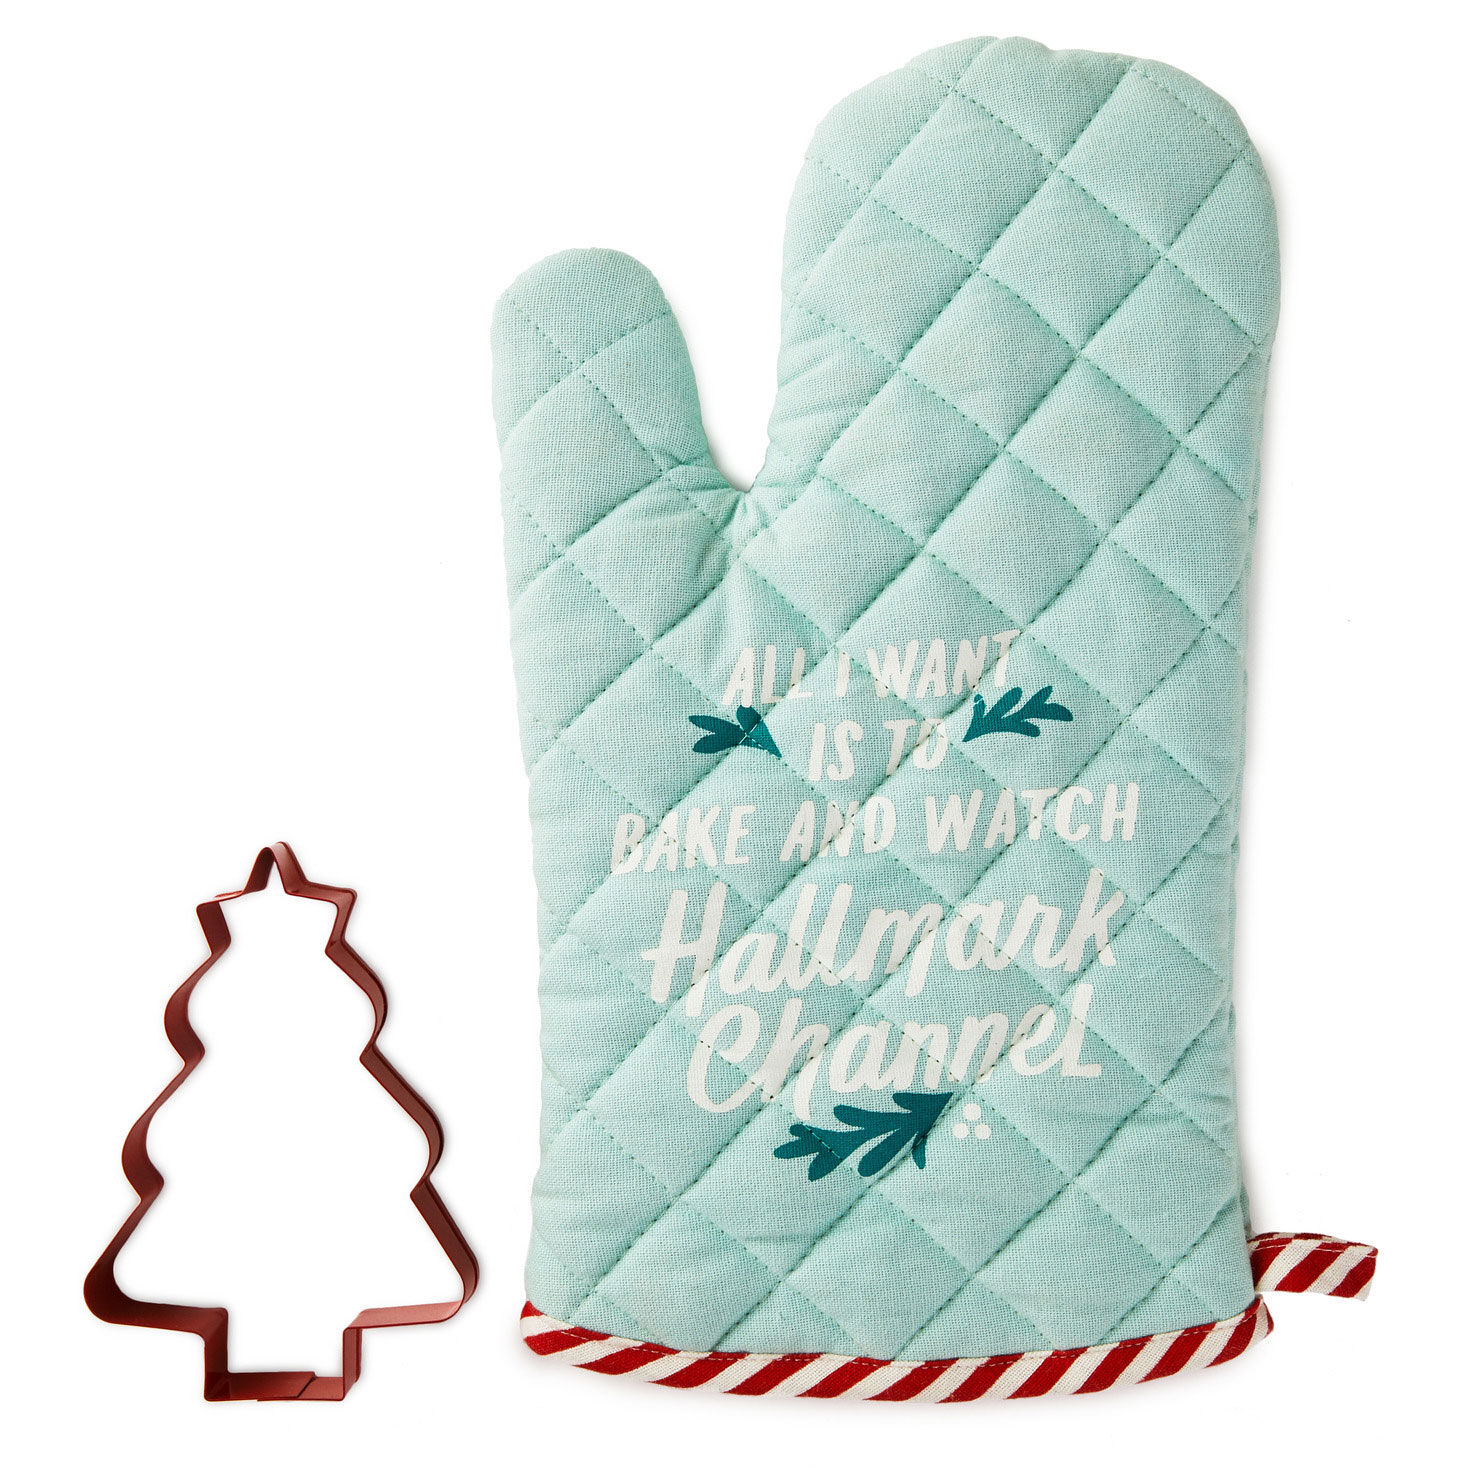 https://www.hallmark.com/dw/image/v2/AALB_PRD/on/demandware.static/-/Sites-hallmark-master/default/dw95ec3c8a/images/finished-goods/products/1XKT3513/Hallmark-Channel-Holiday-Oven-Mitt-and-Cookie-Cutter_1XKT3513_01.jpg?sfrm=jpg